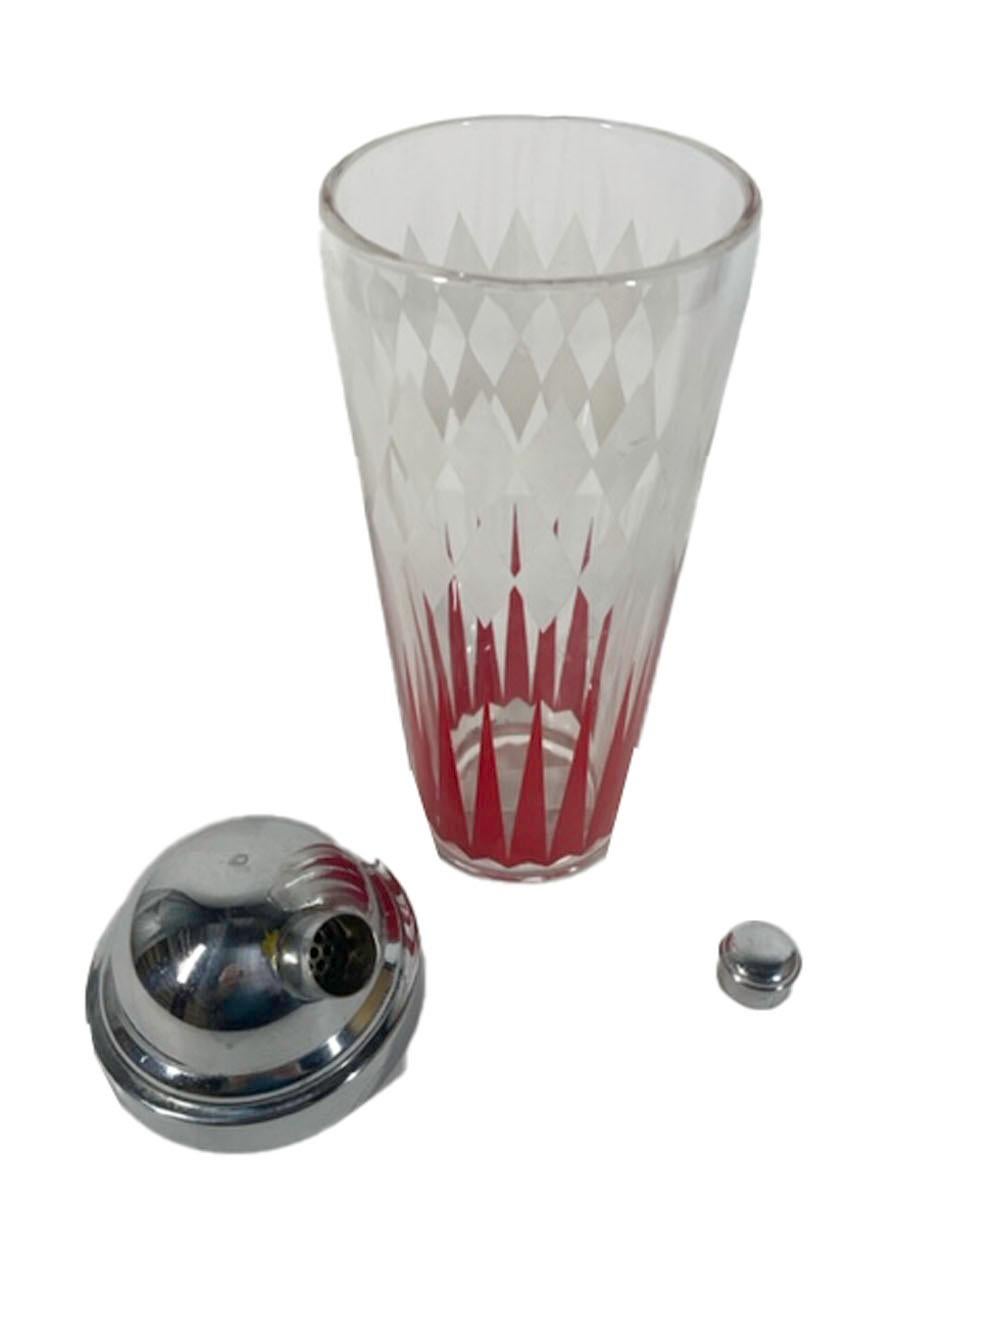 Art Deco Cocktail Shaker with White Diamonds over Red Arrows 1